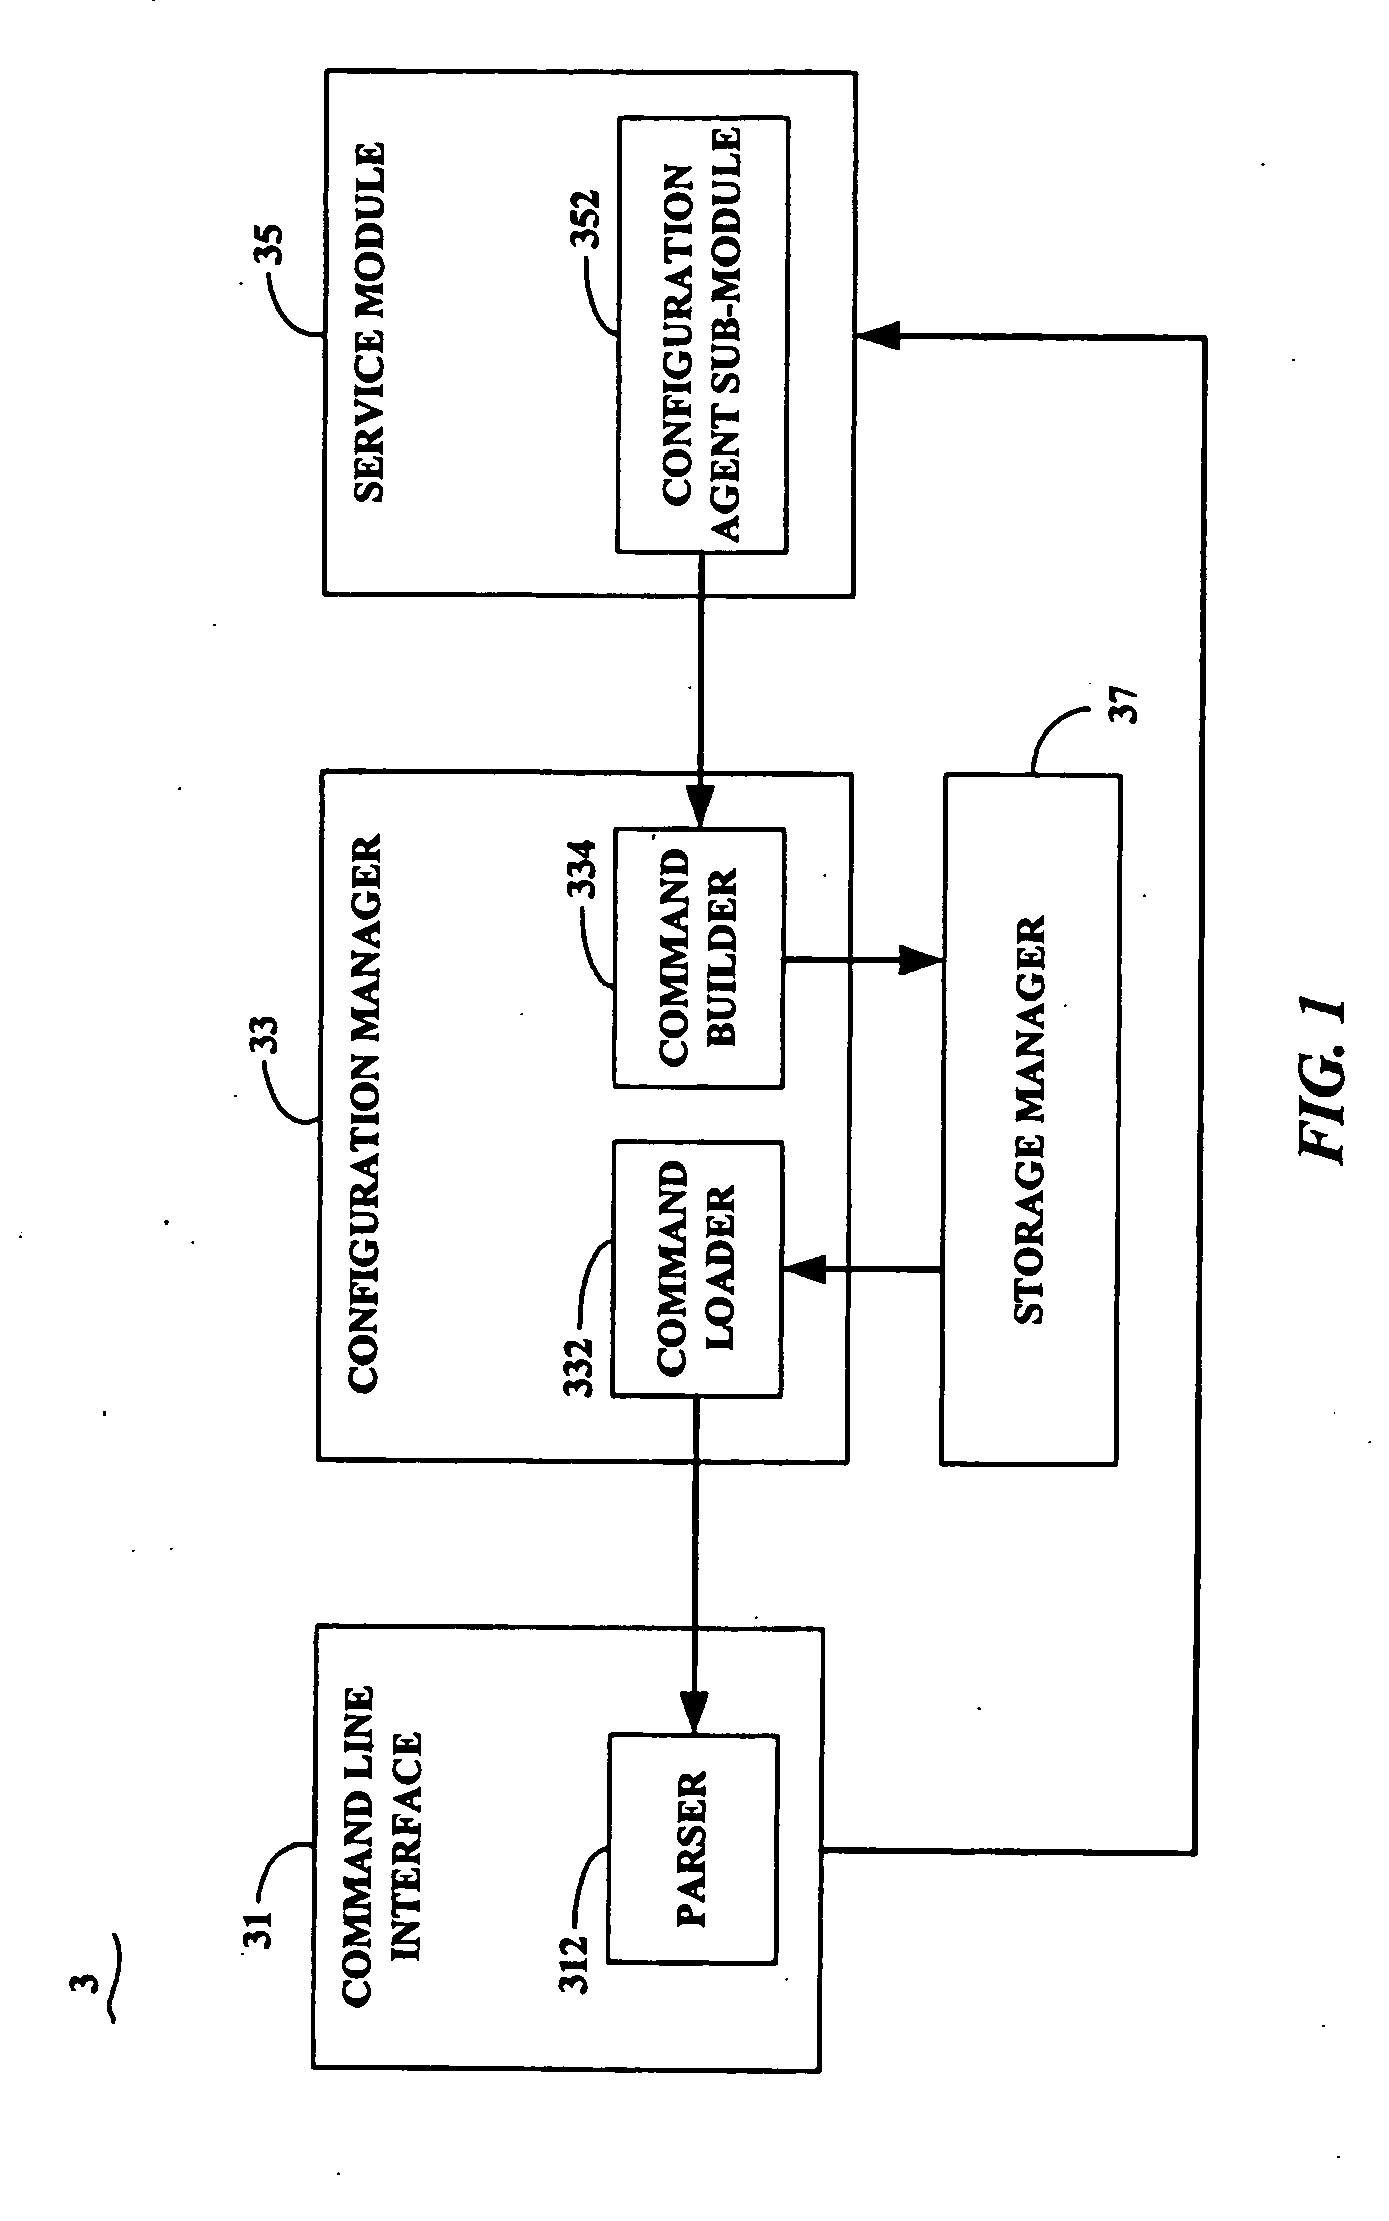 System and method for configuring and managing communication devices